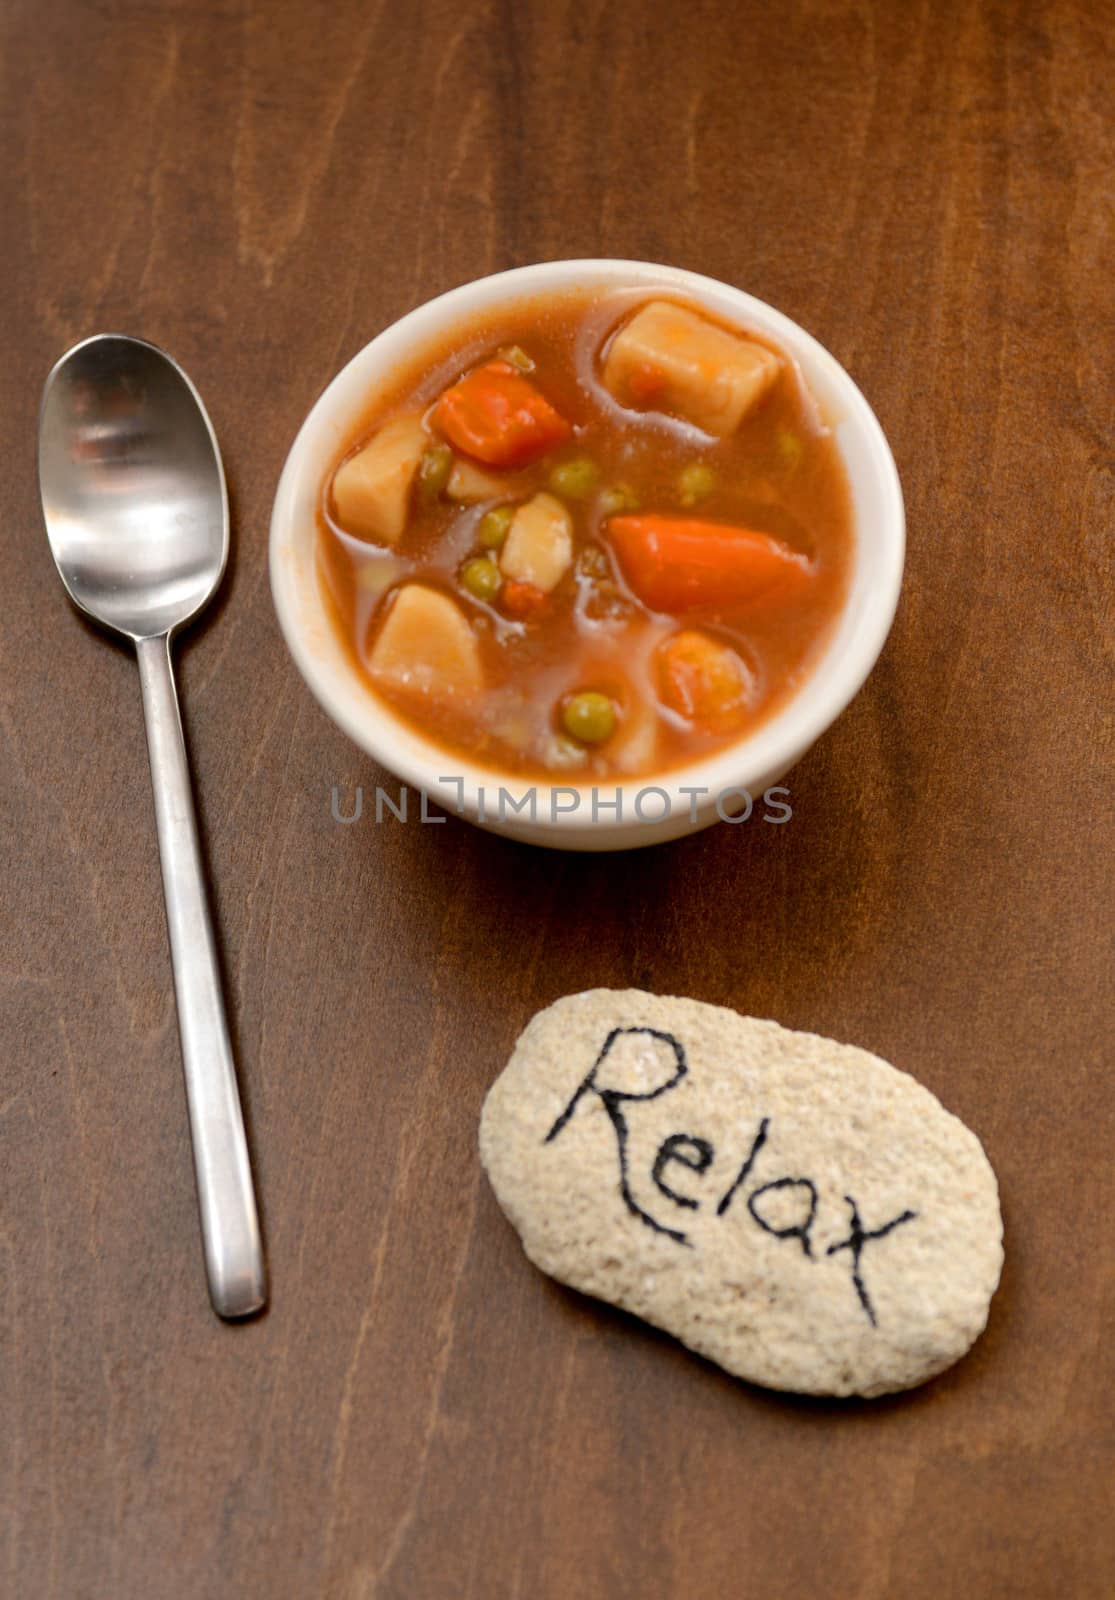 relax with bowl of country vegetable soup